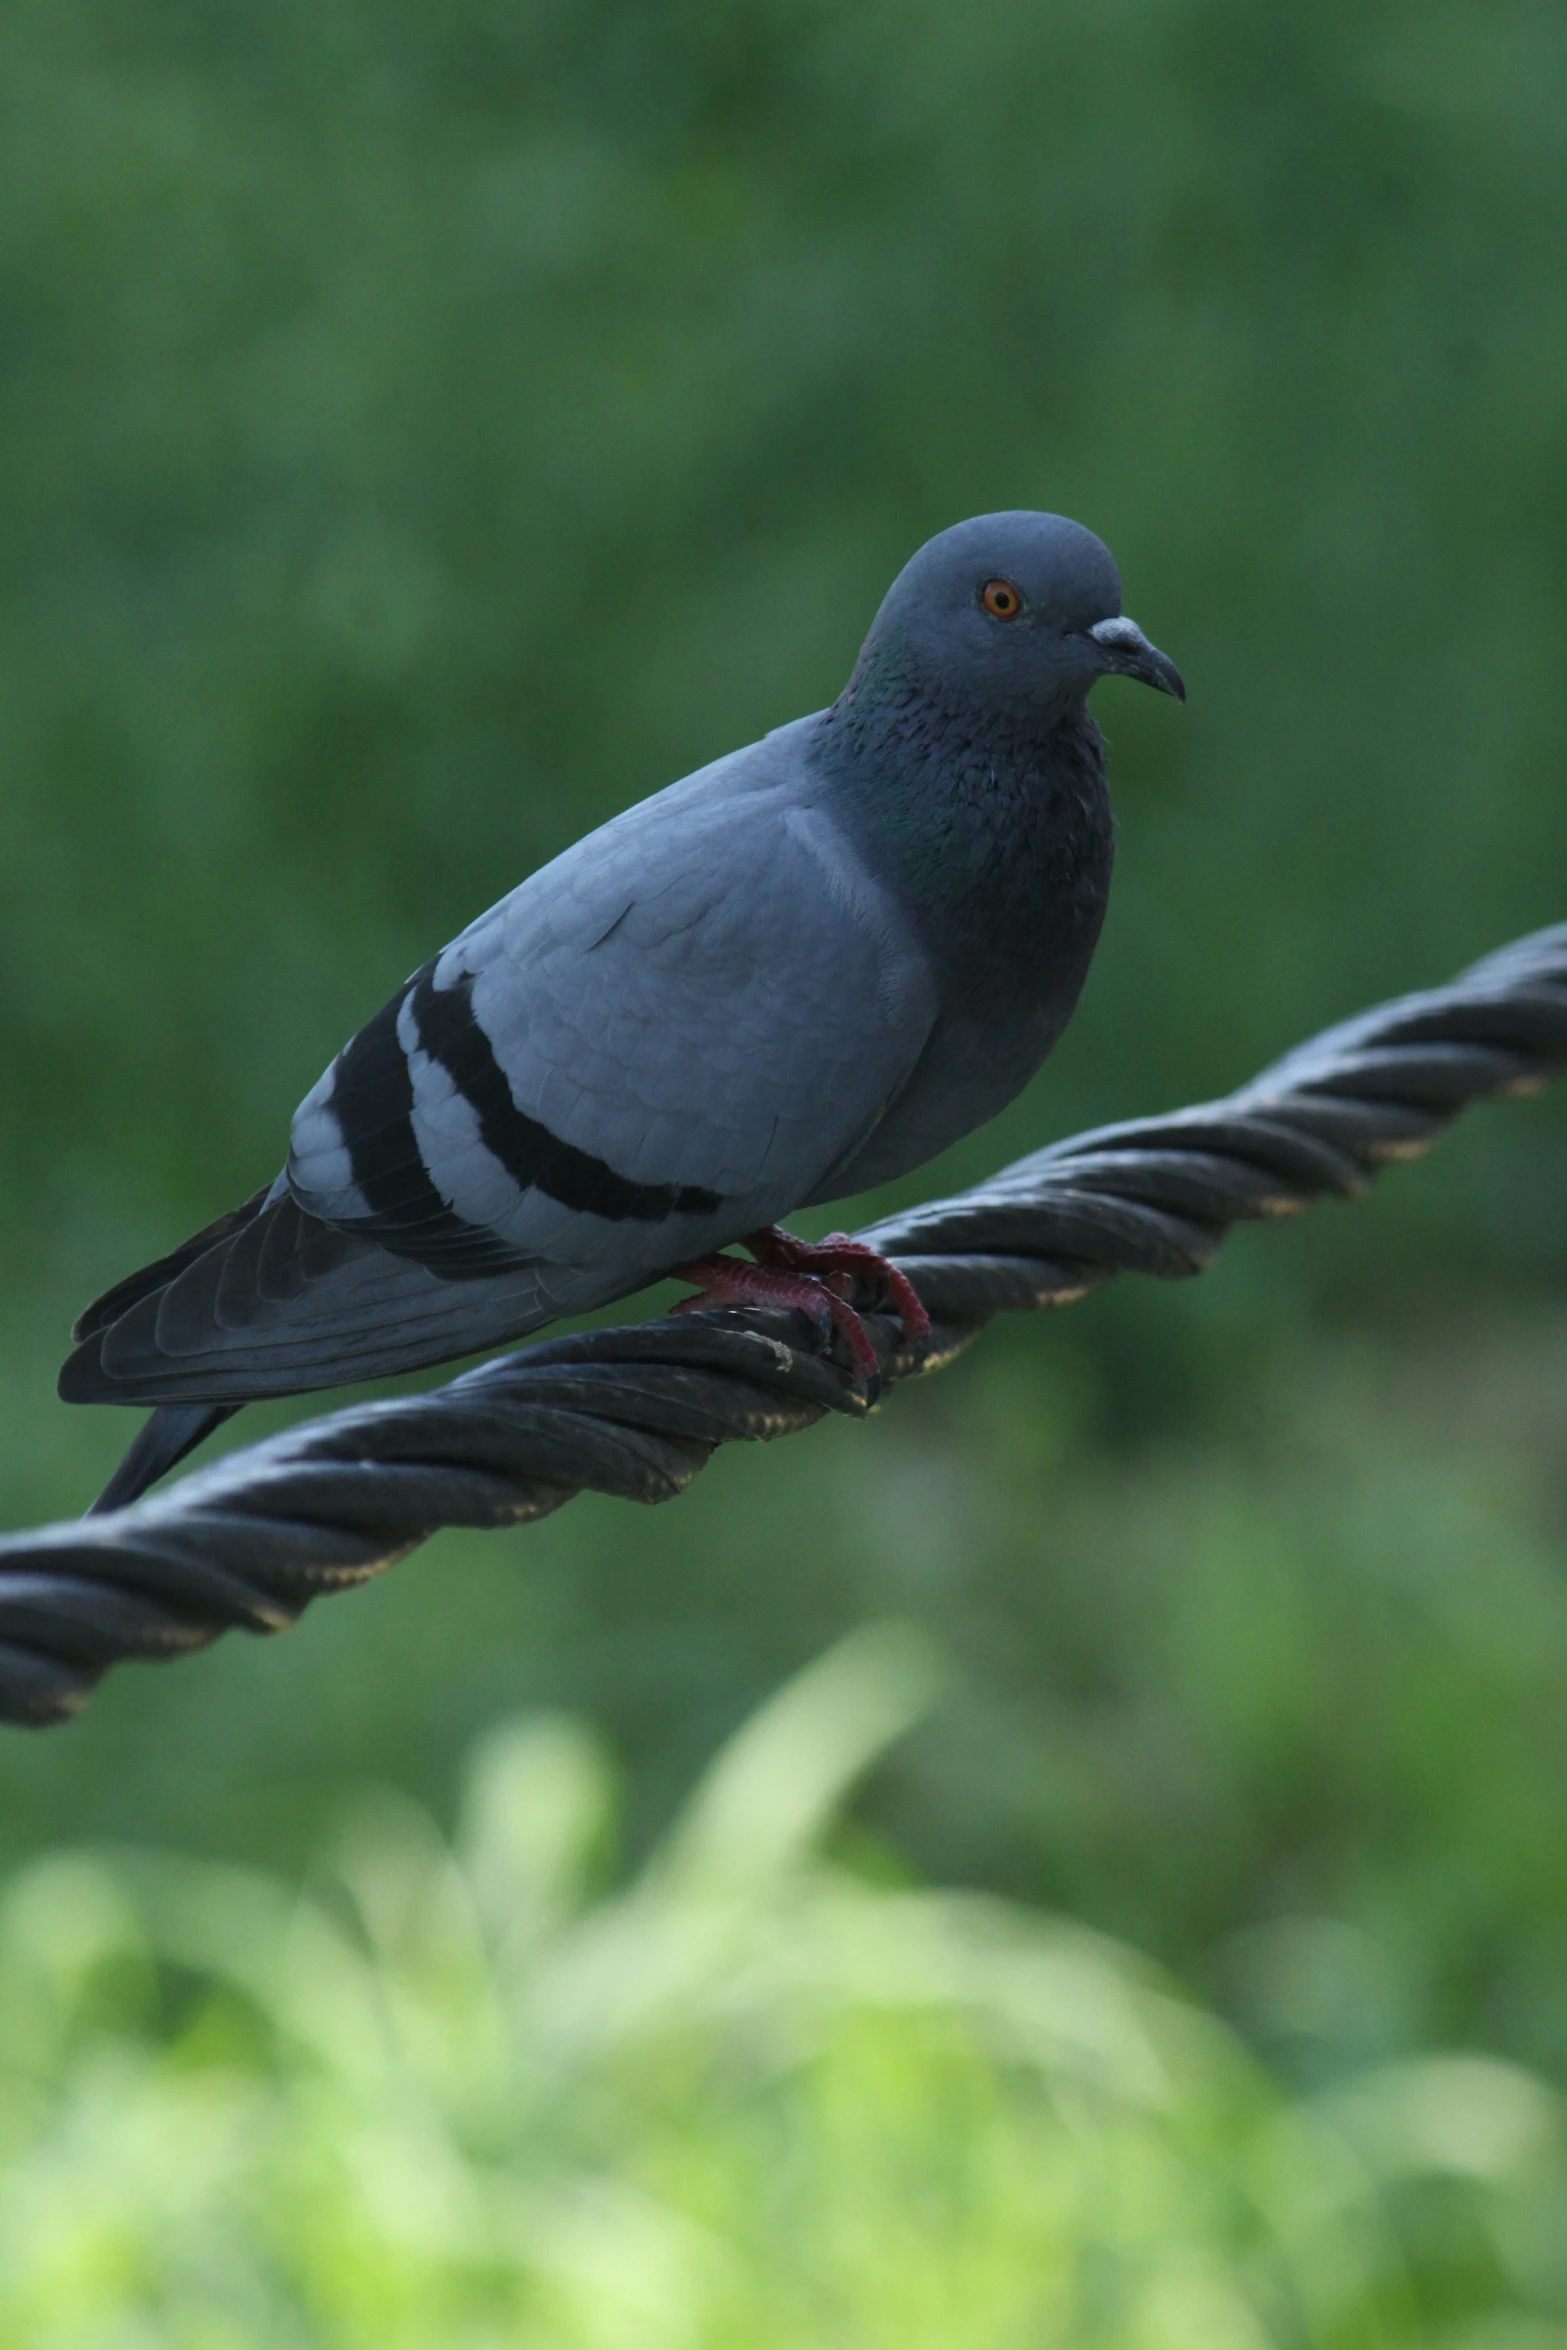 the pigeon is perched on the cable beside the plants